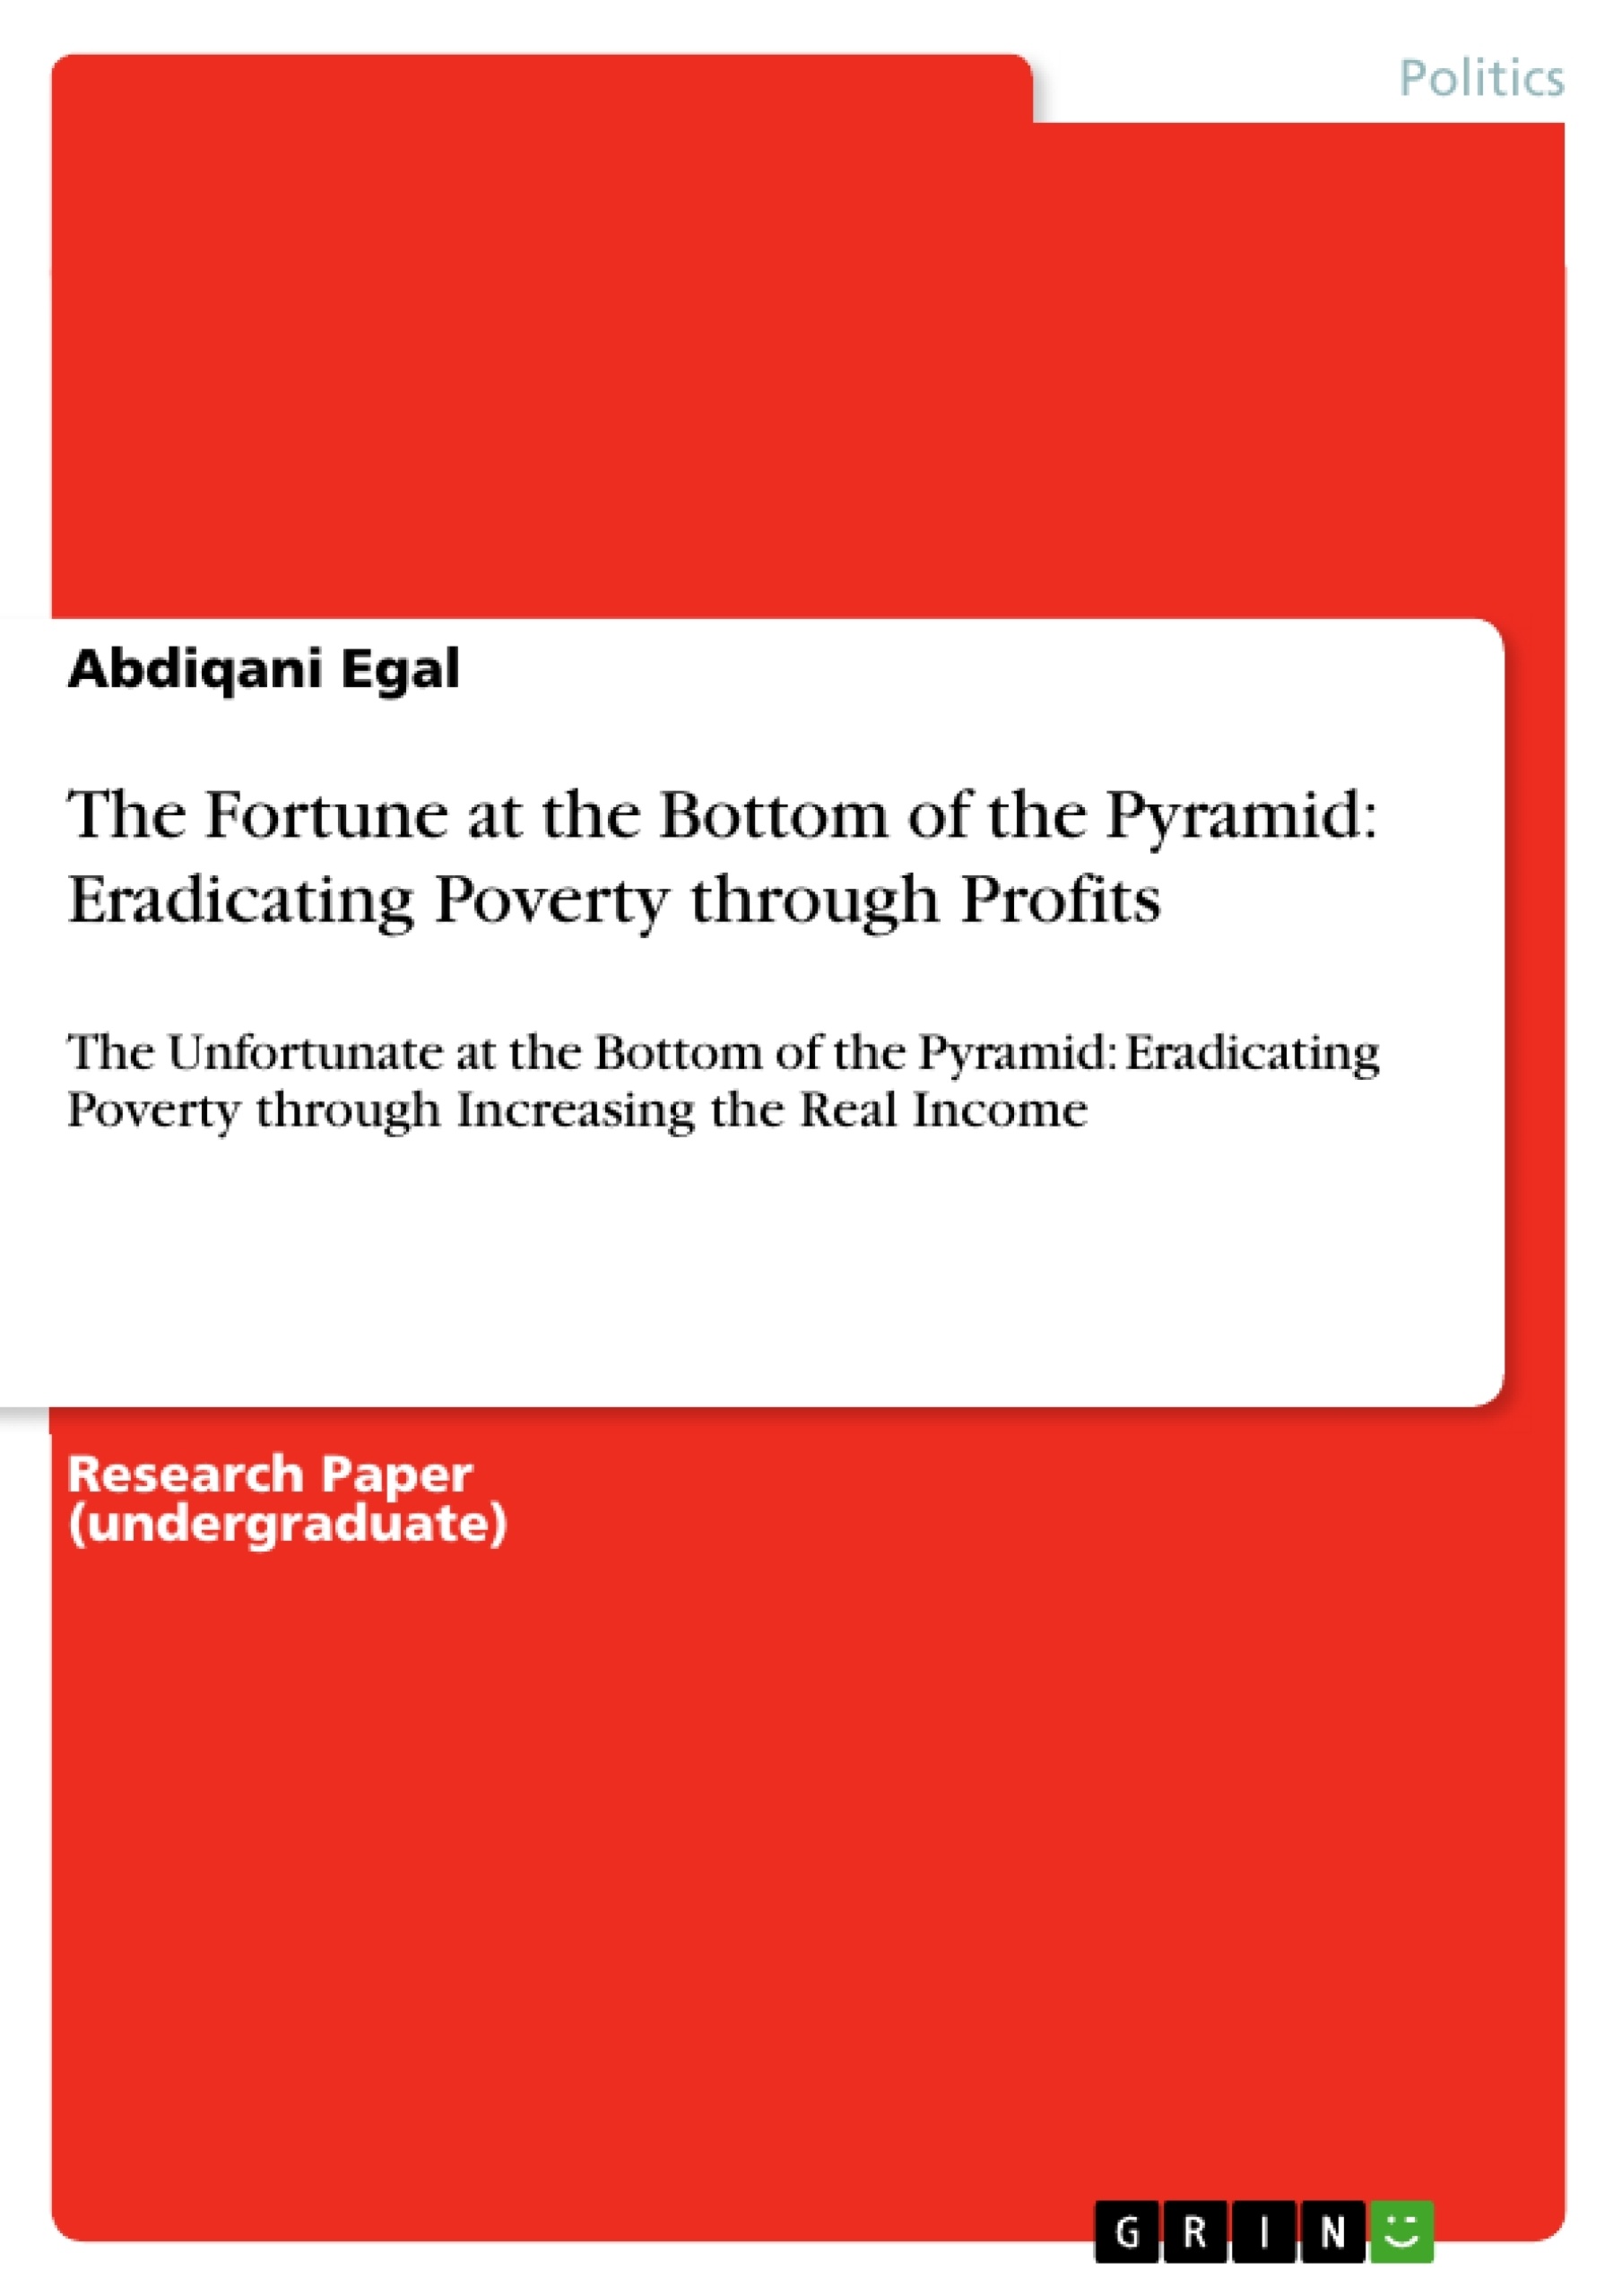 Titel: The Fortune at the Bottom of the Pyramid: Eradicating Poverty through Profits